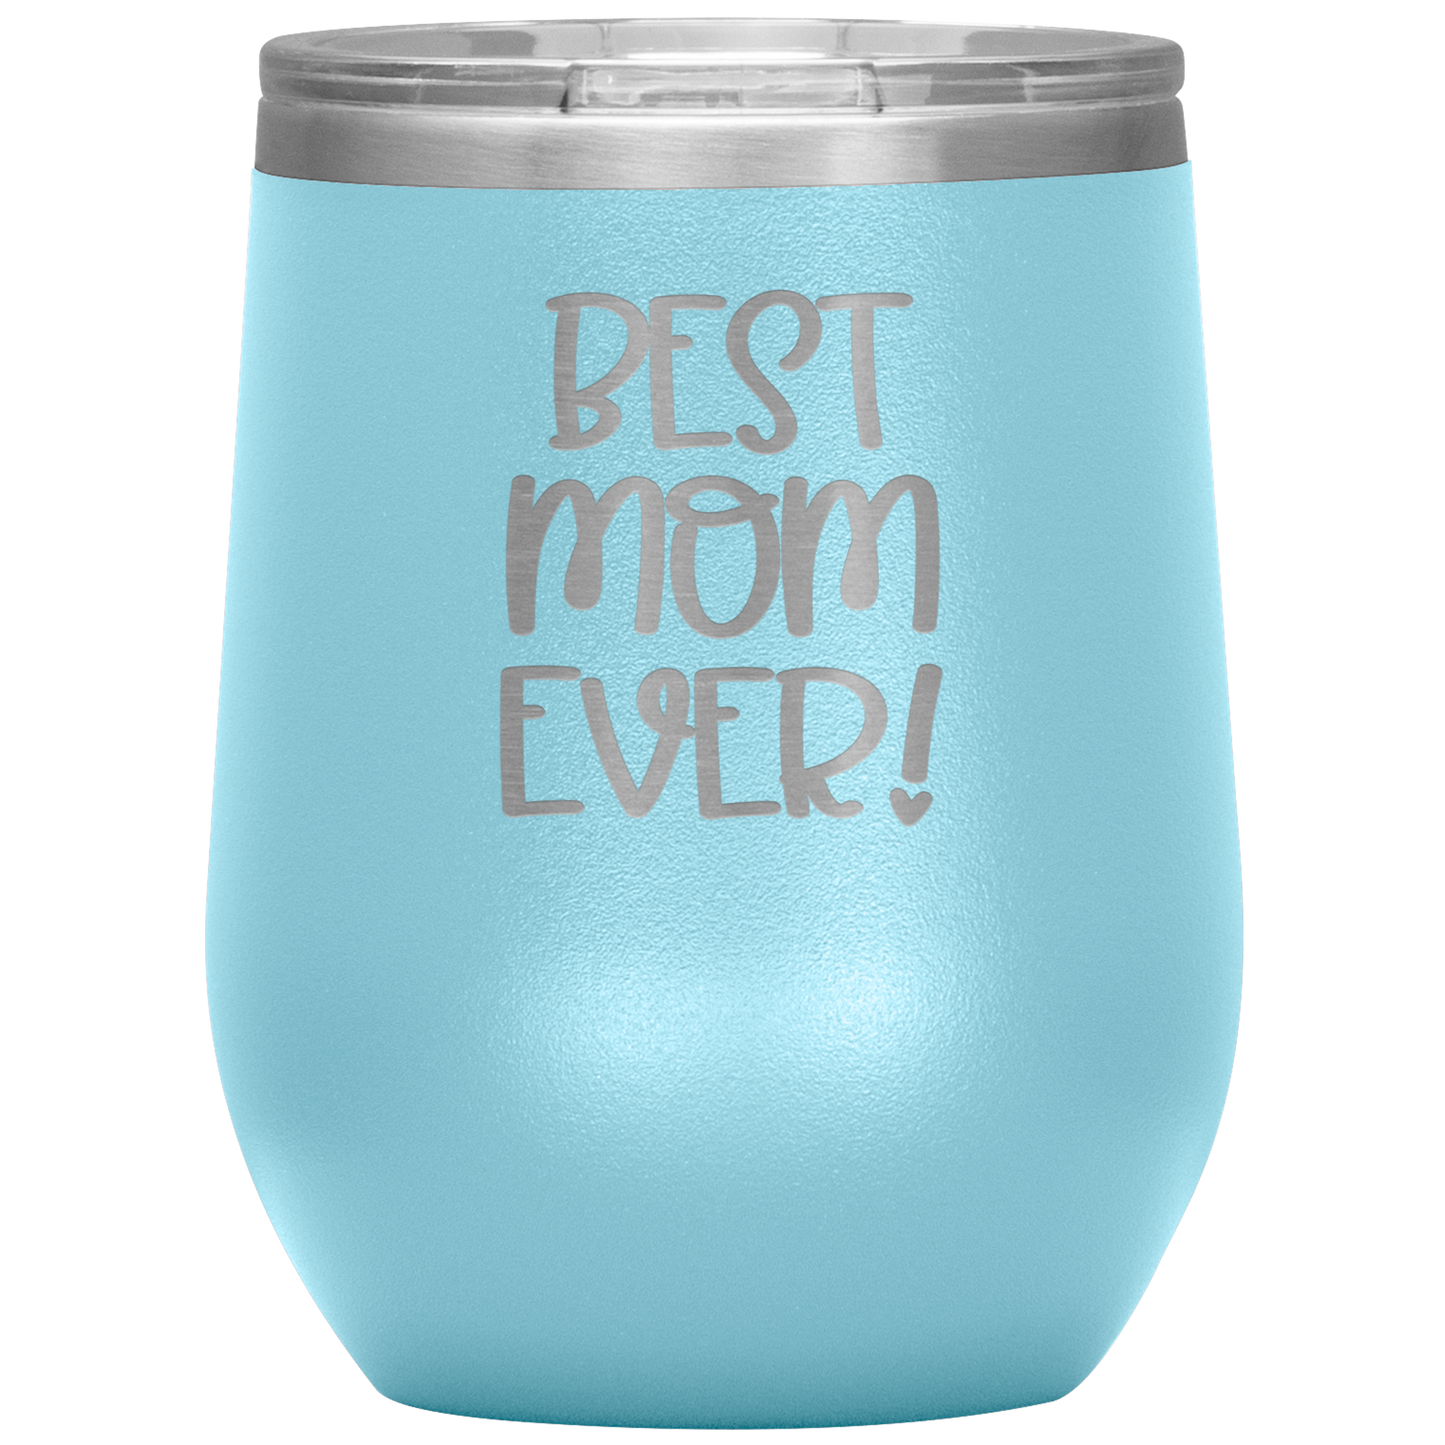 "Best Mom Ever!" 12 oz. Insulated Stainless Steel Wine Tumbler with Lid